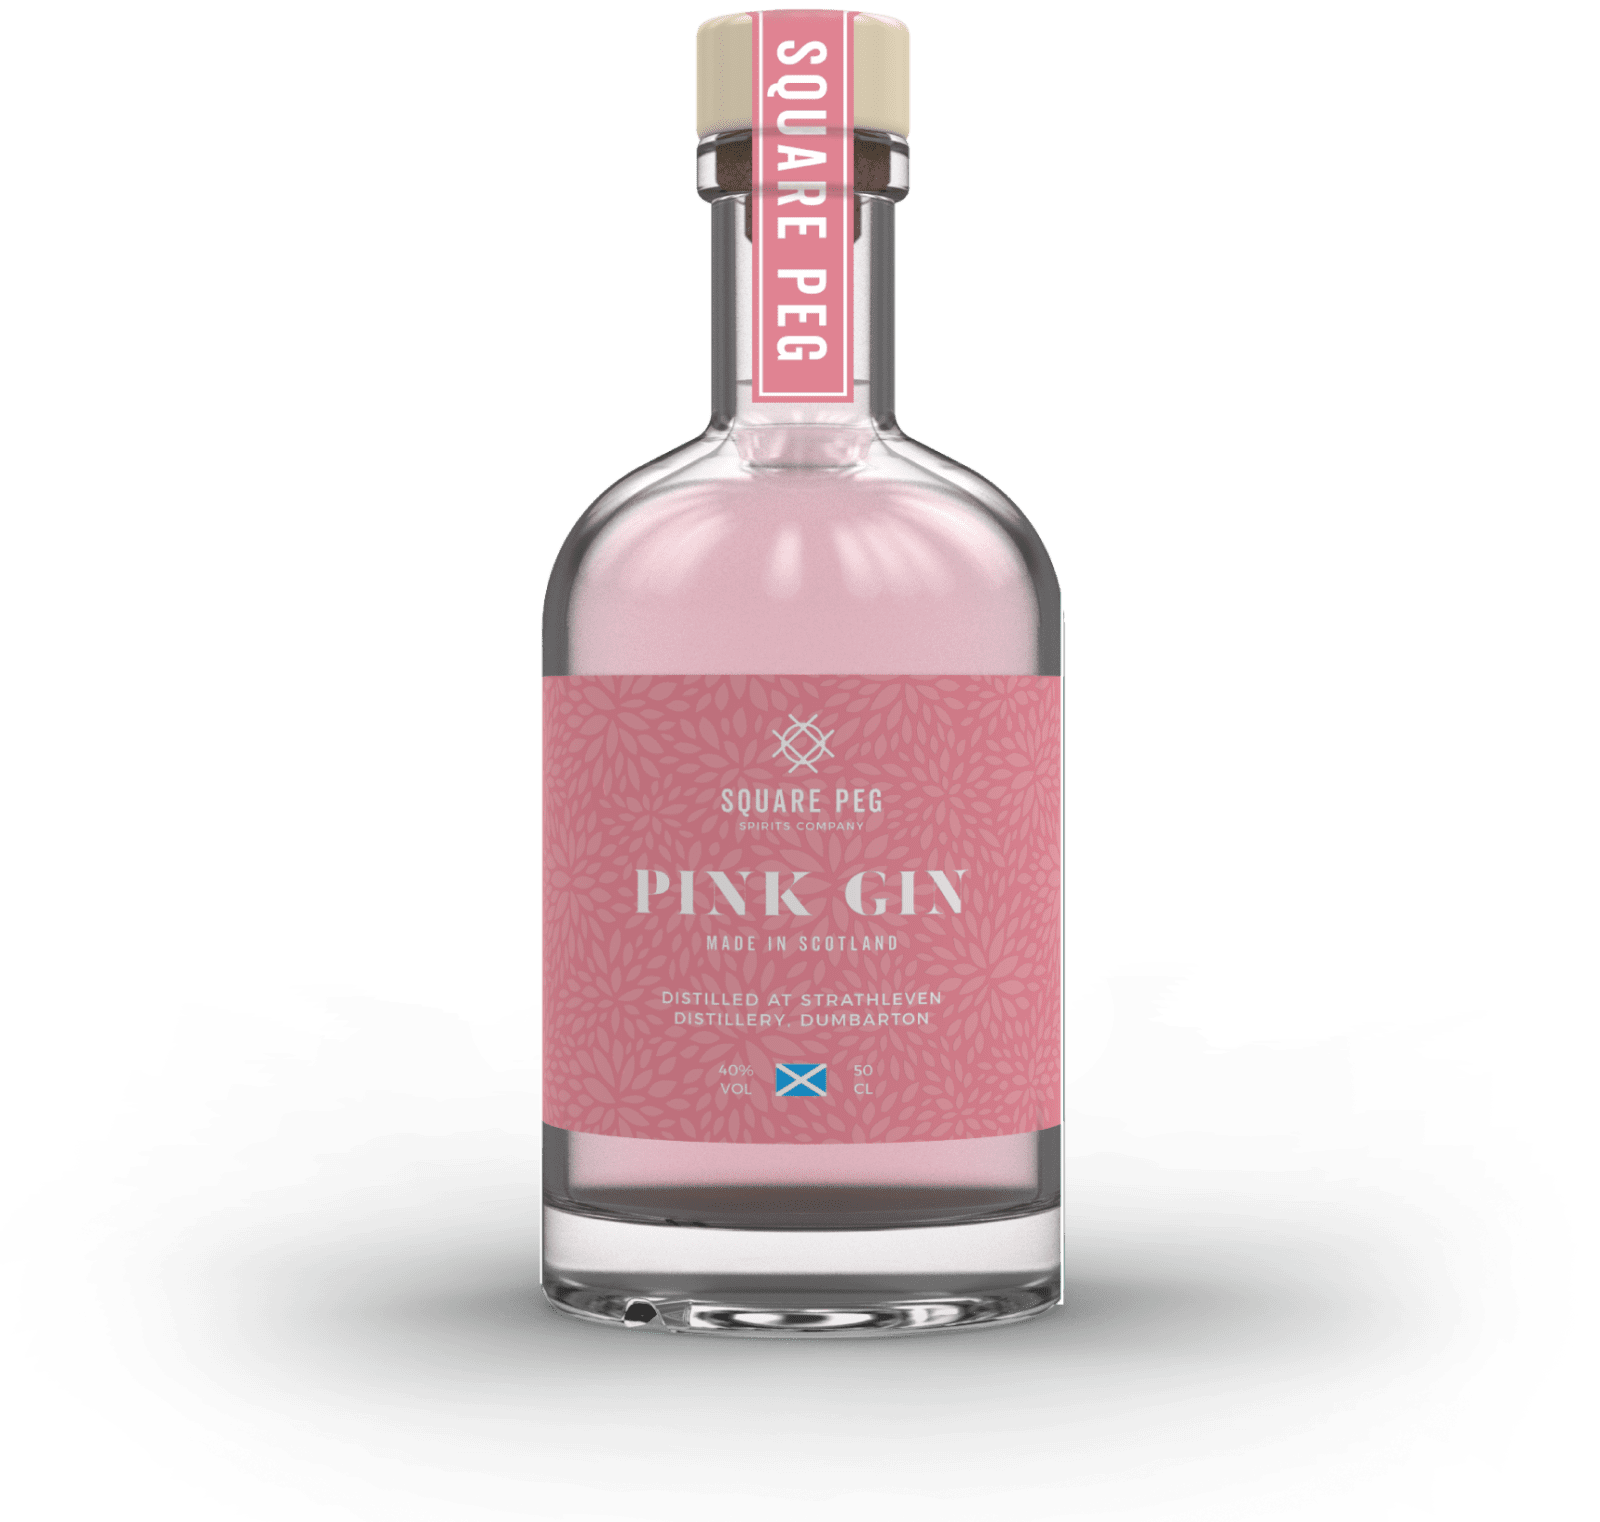 7 Scottish Scotsman gins Drink pink summer you try | this and Food should